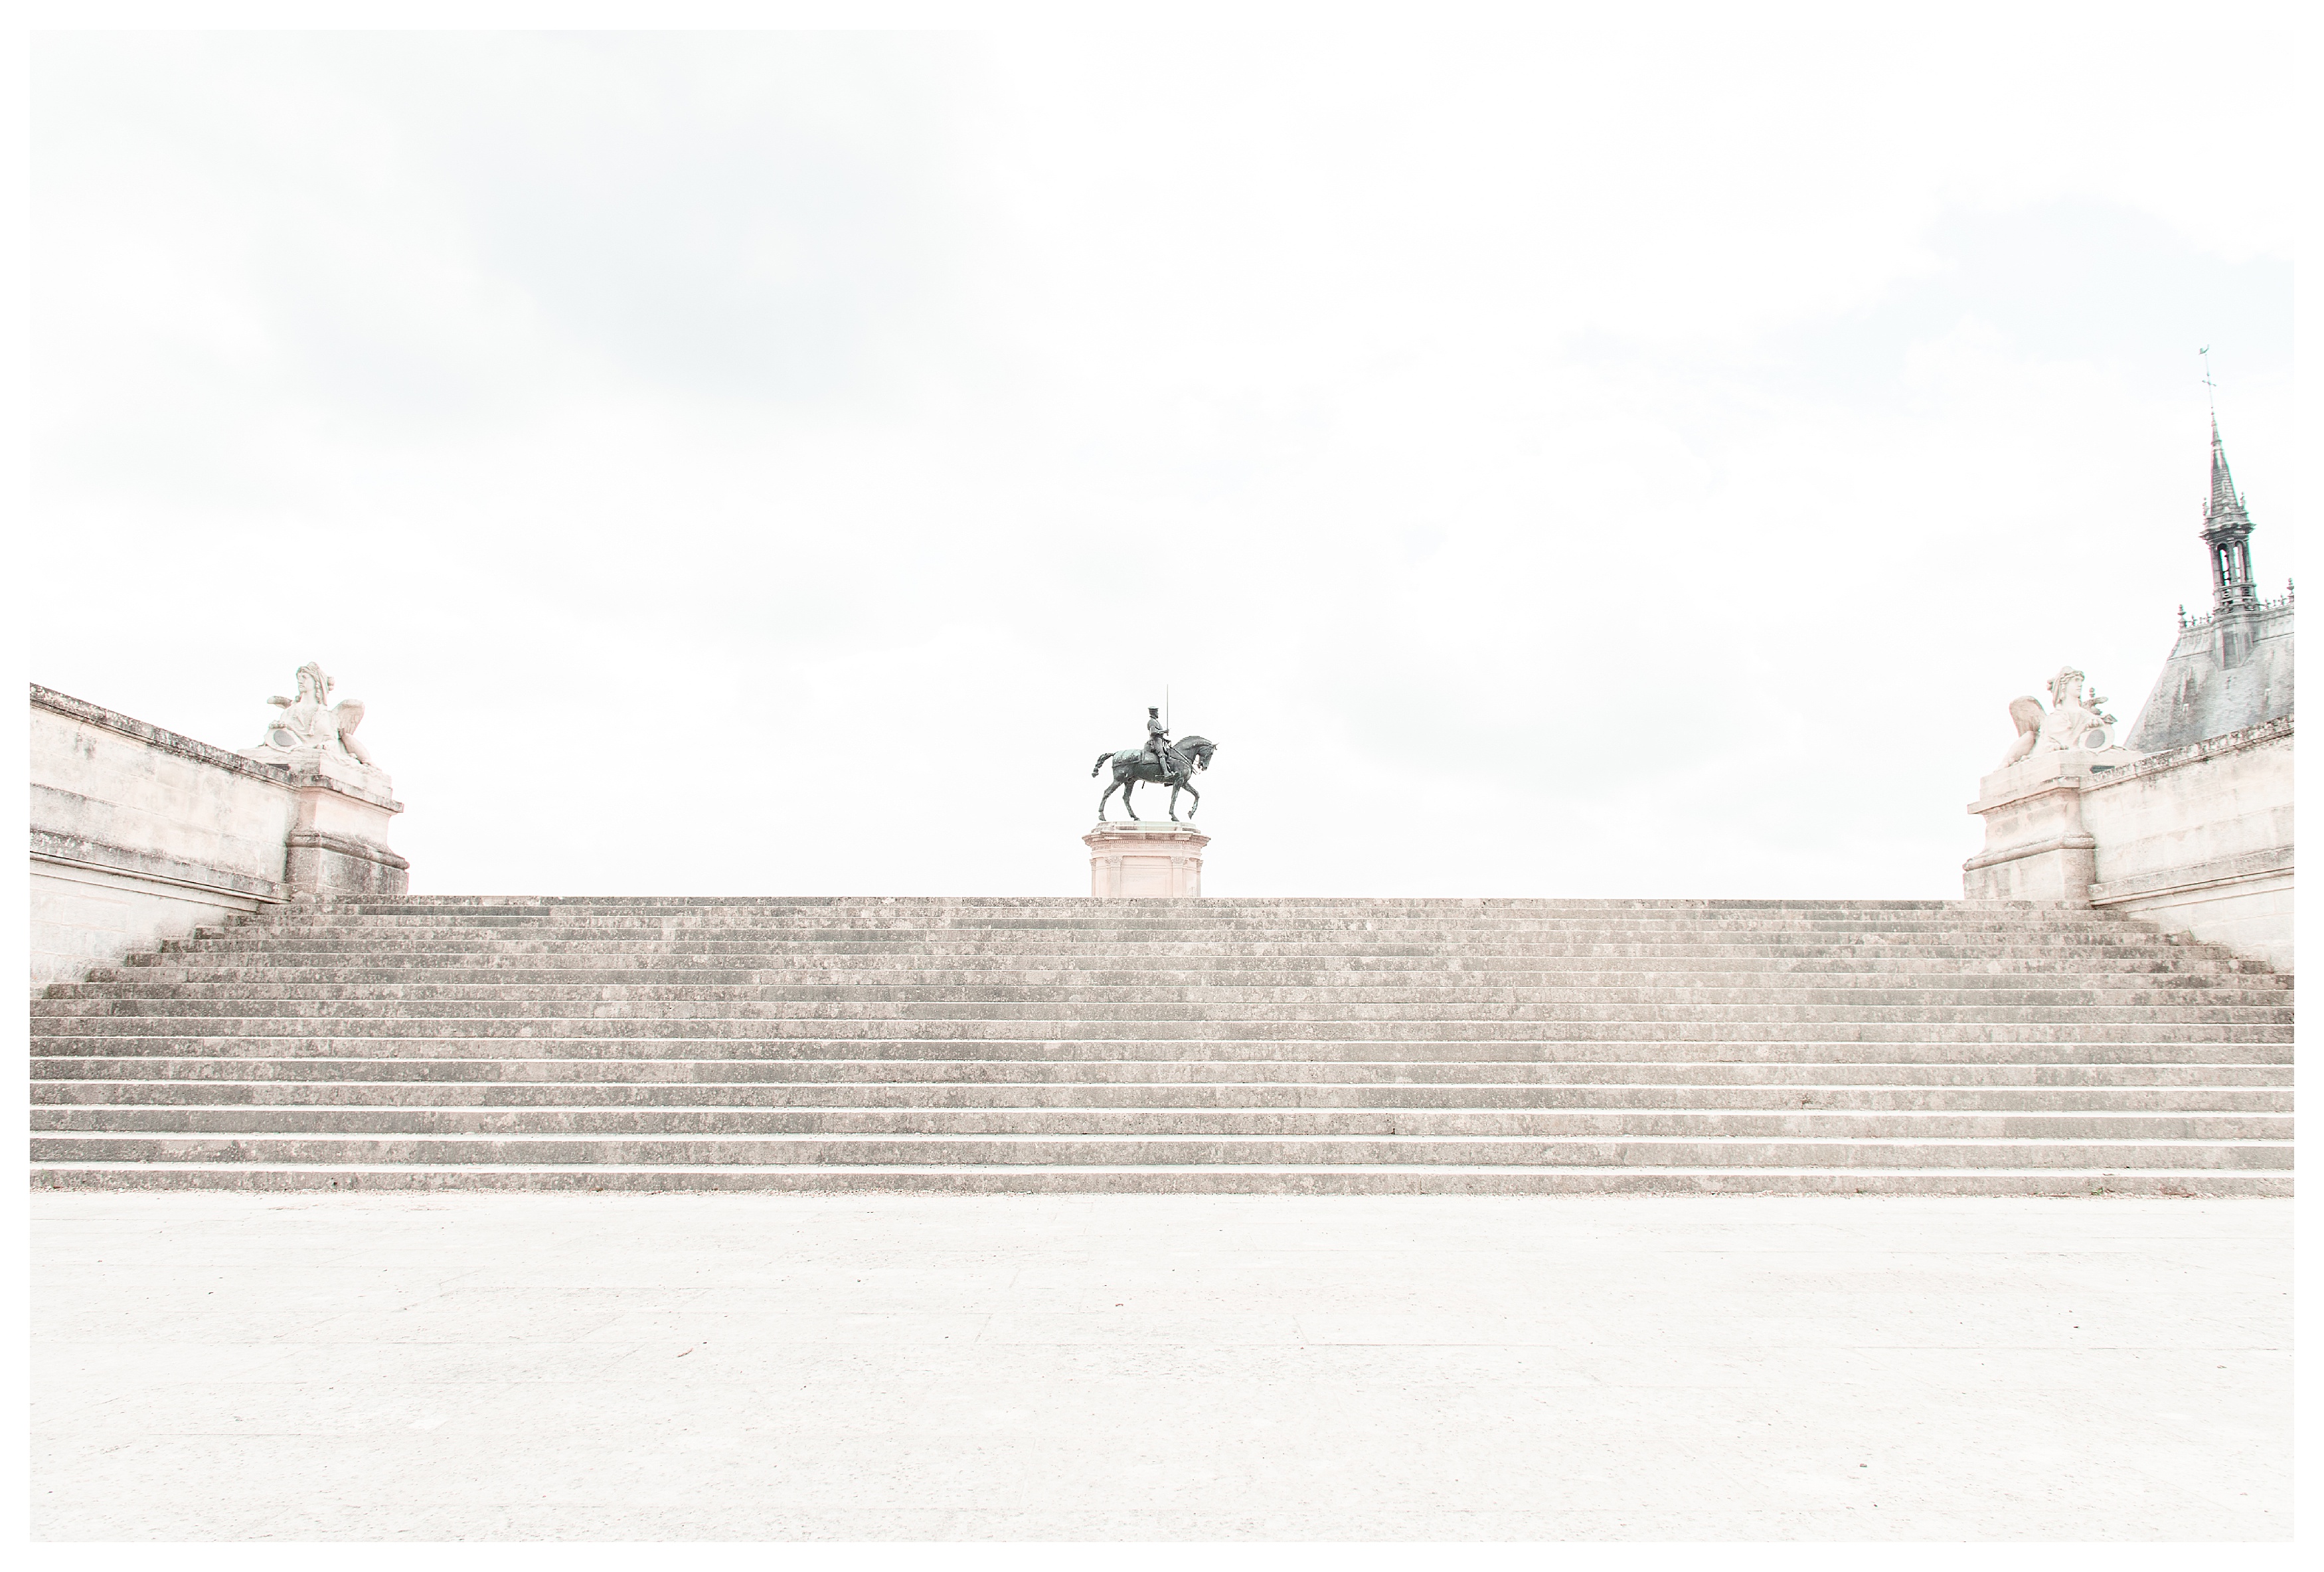 statue of a man on a horse at the château de chantilly